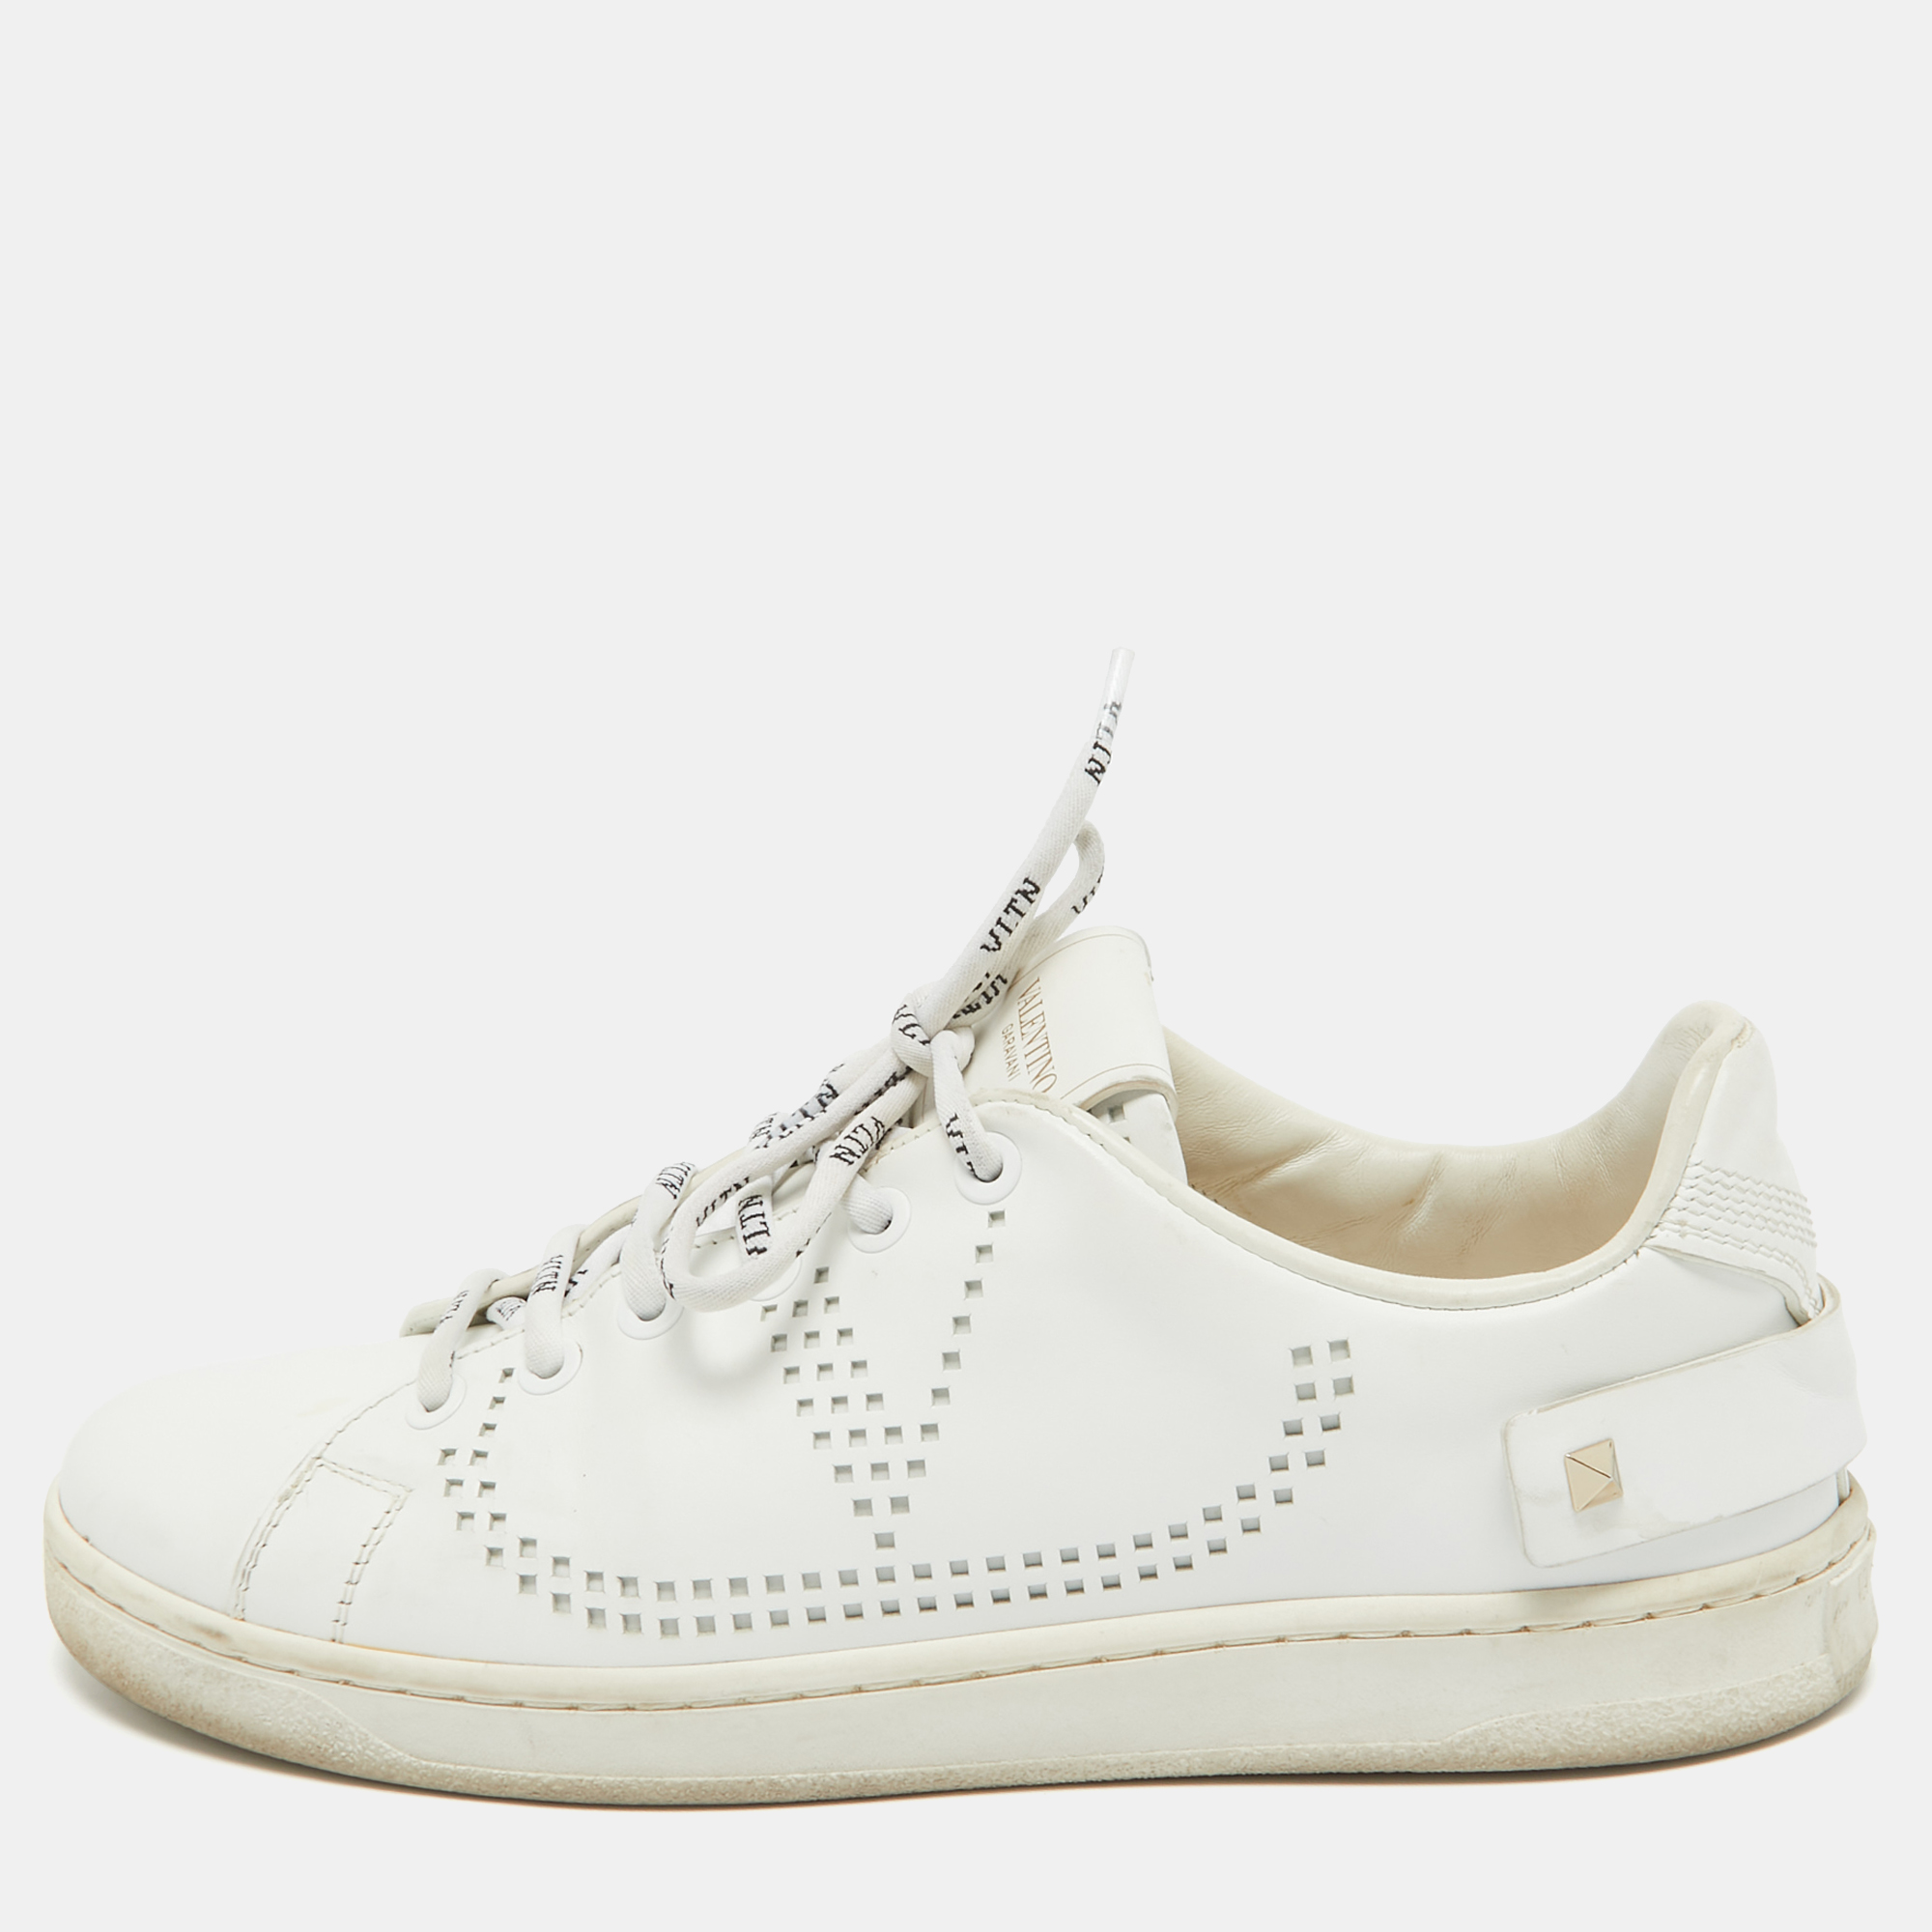 Amp up your off duty wardrobe with Valentinos white Backnet trainers. Theyre crafted in Italy from smooth leather with a Rockstud embellished heel tab and V logo perforations then set on a rubber sole. Style them with neutral separates.